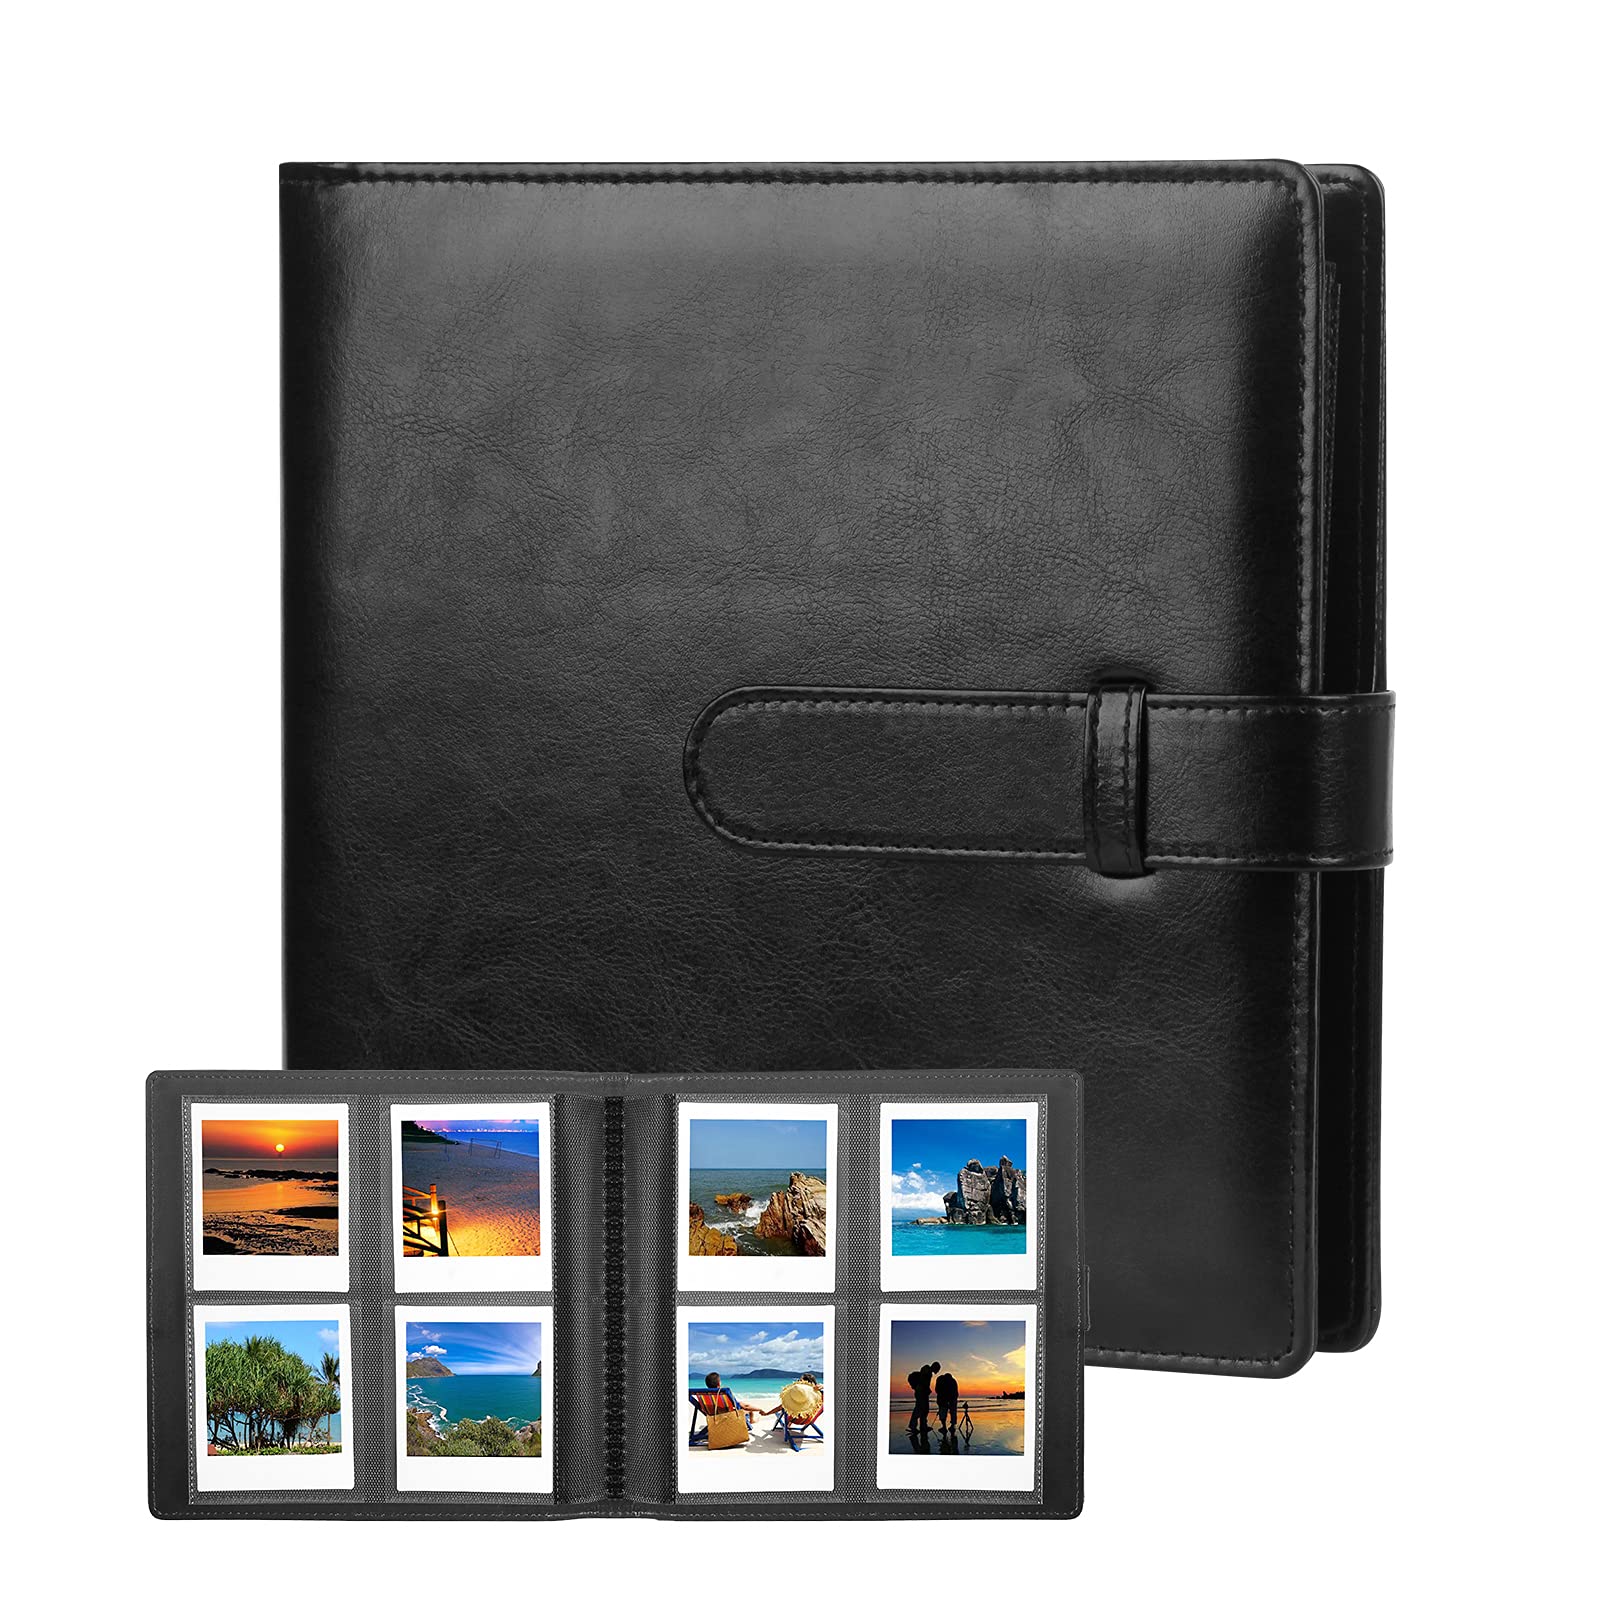 256 Pockets Photo Album for Fujifilm Instax Square SQ1 SQ6 SQ10 SQ20 Instant Camera, Fujifilm Instax SP-3 Mobile Printer, Extra Large Picture Albums for Fujifilm Instax Square Instant Film (Black)